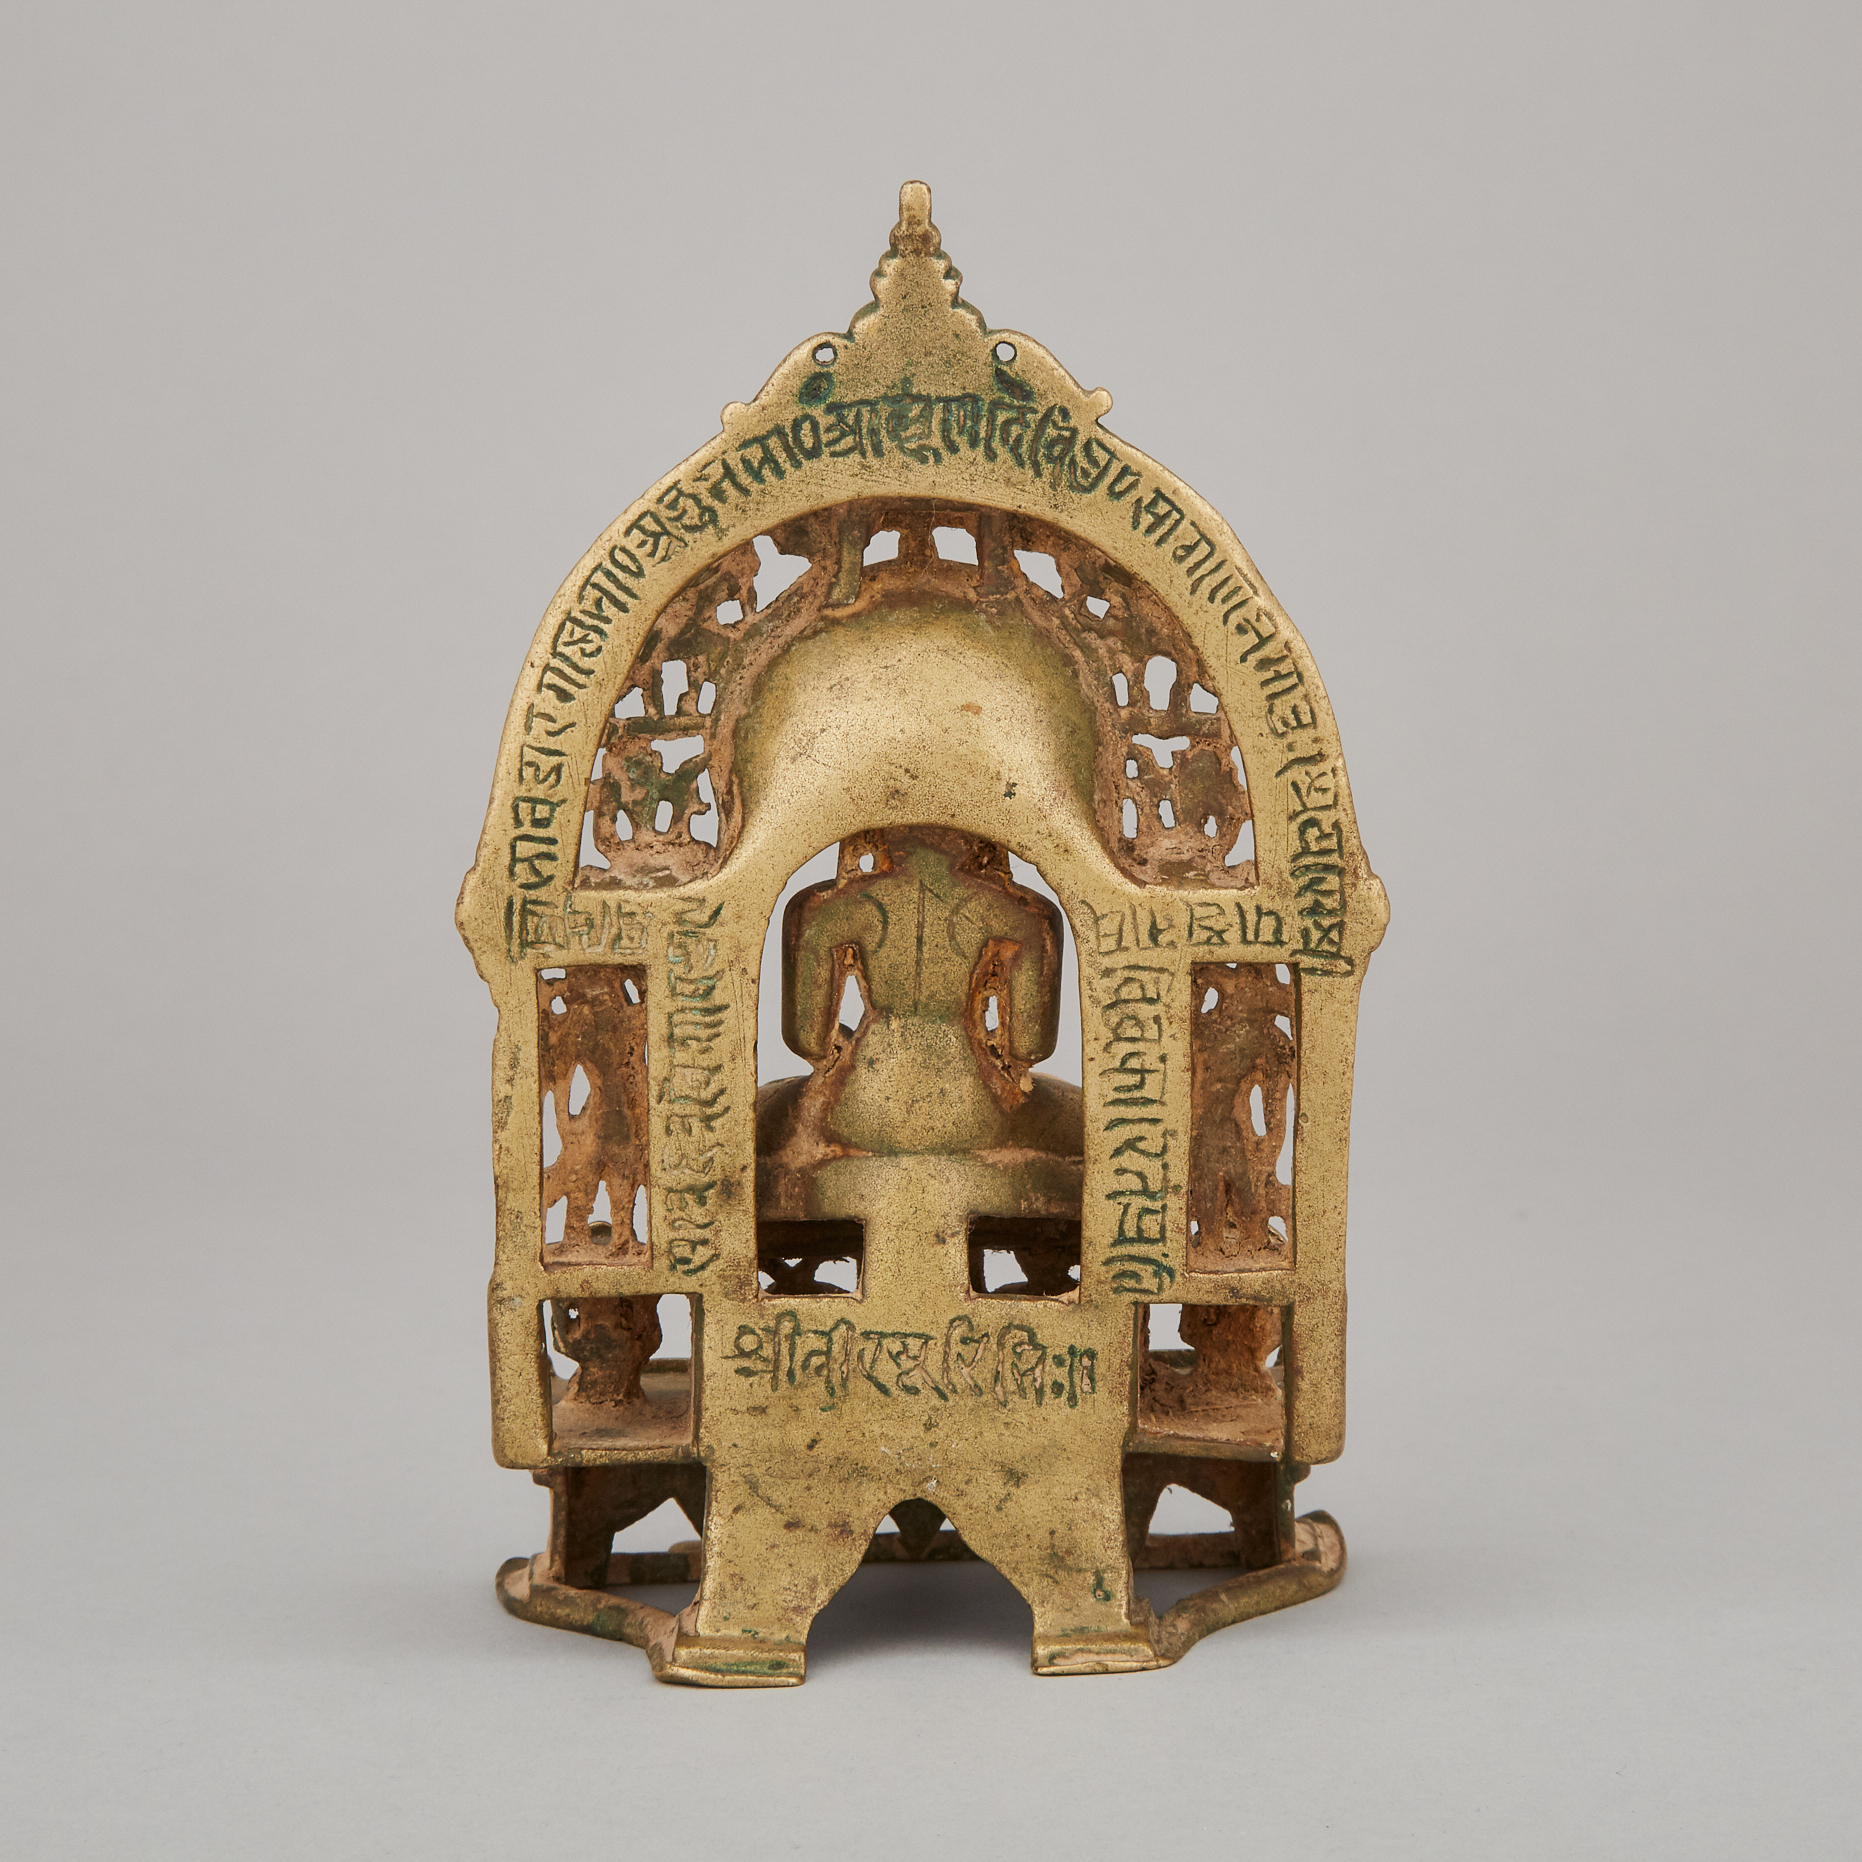 A Silver and Copper Inlaid Bronze Jain Altar, 15th Century